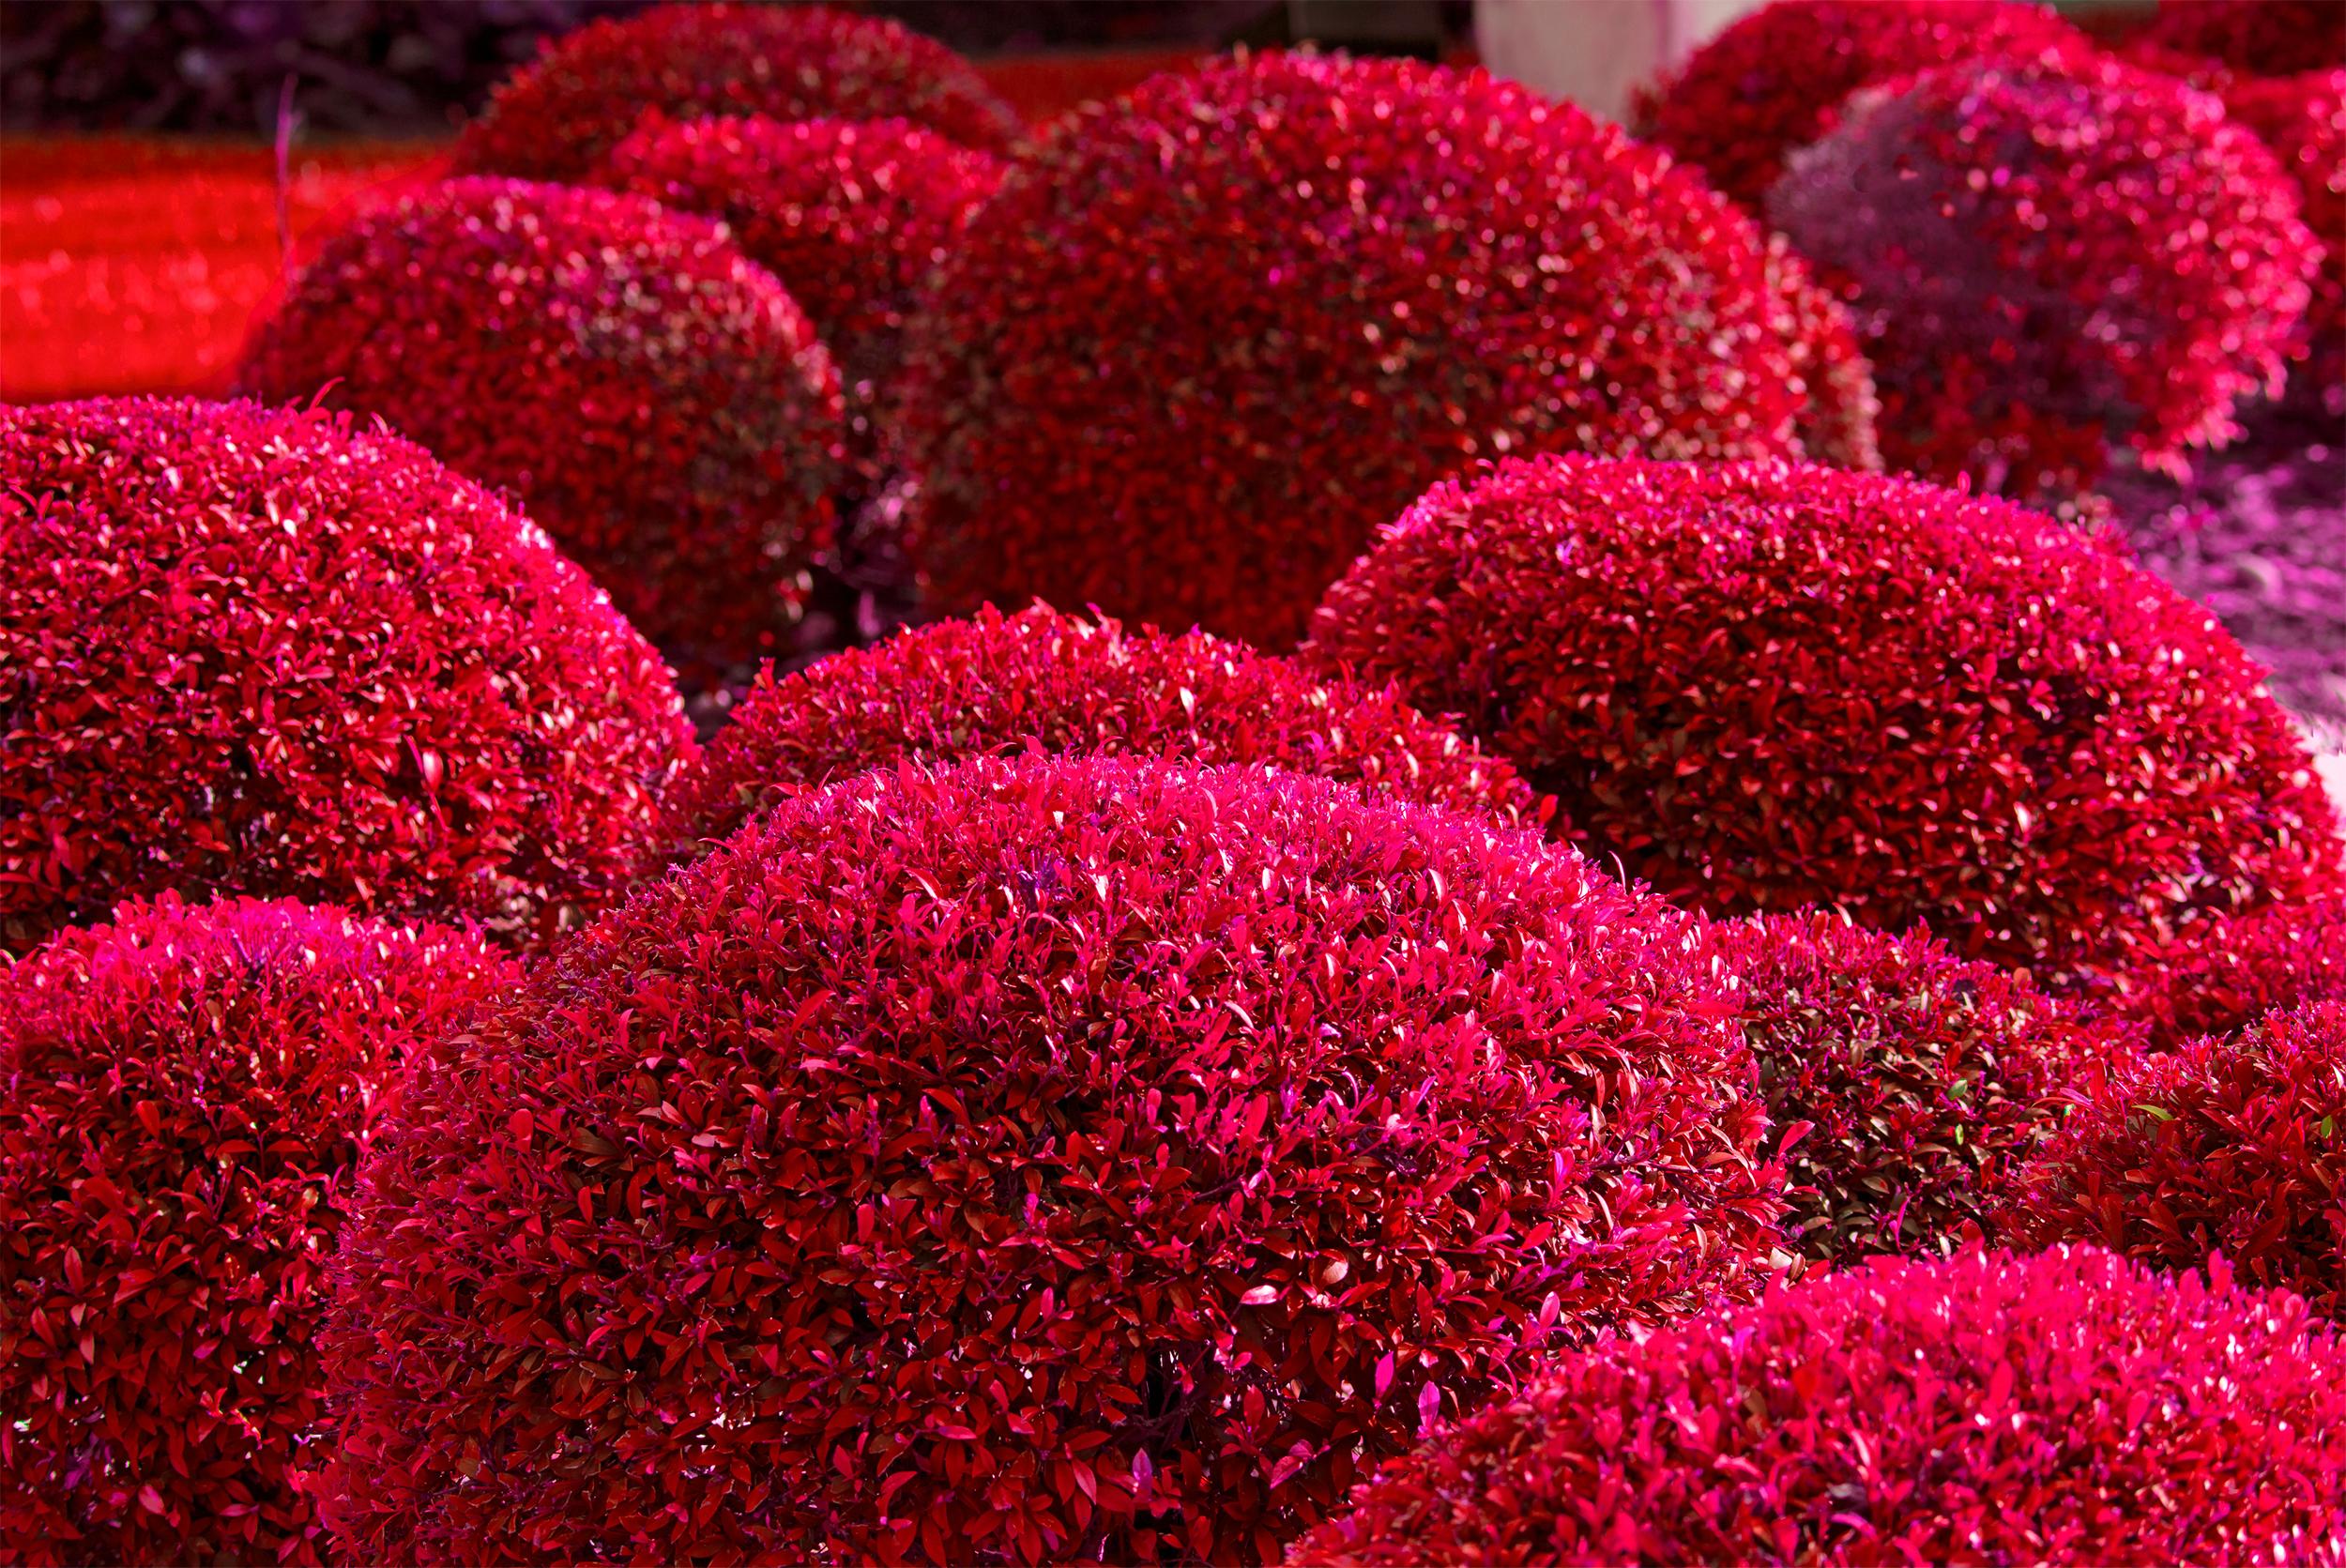 Hedge Fun - Bal Harbor  - Miami Beach, Landscaping in Red and Violet